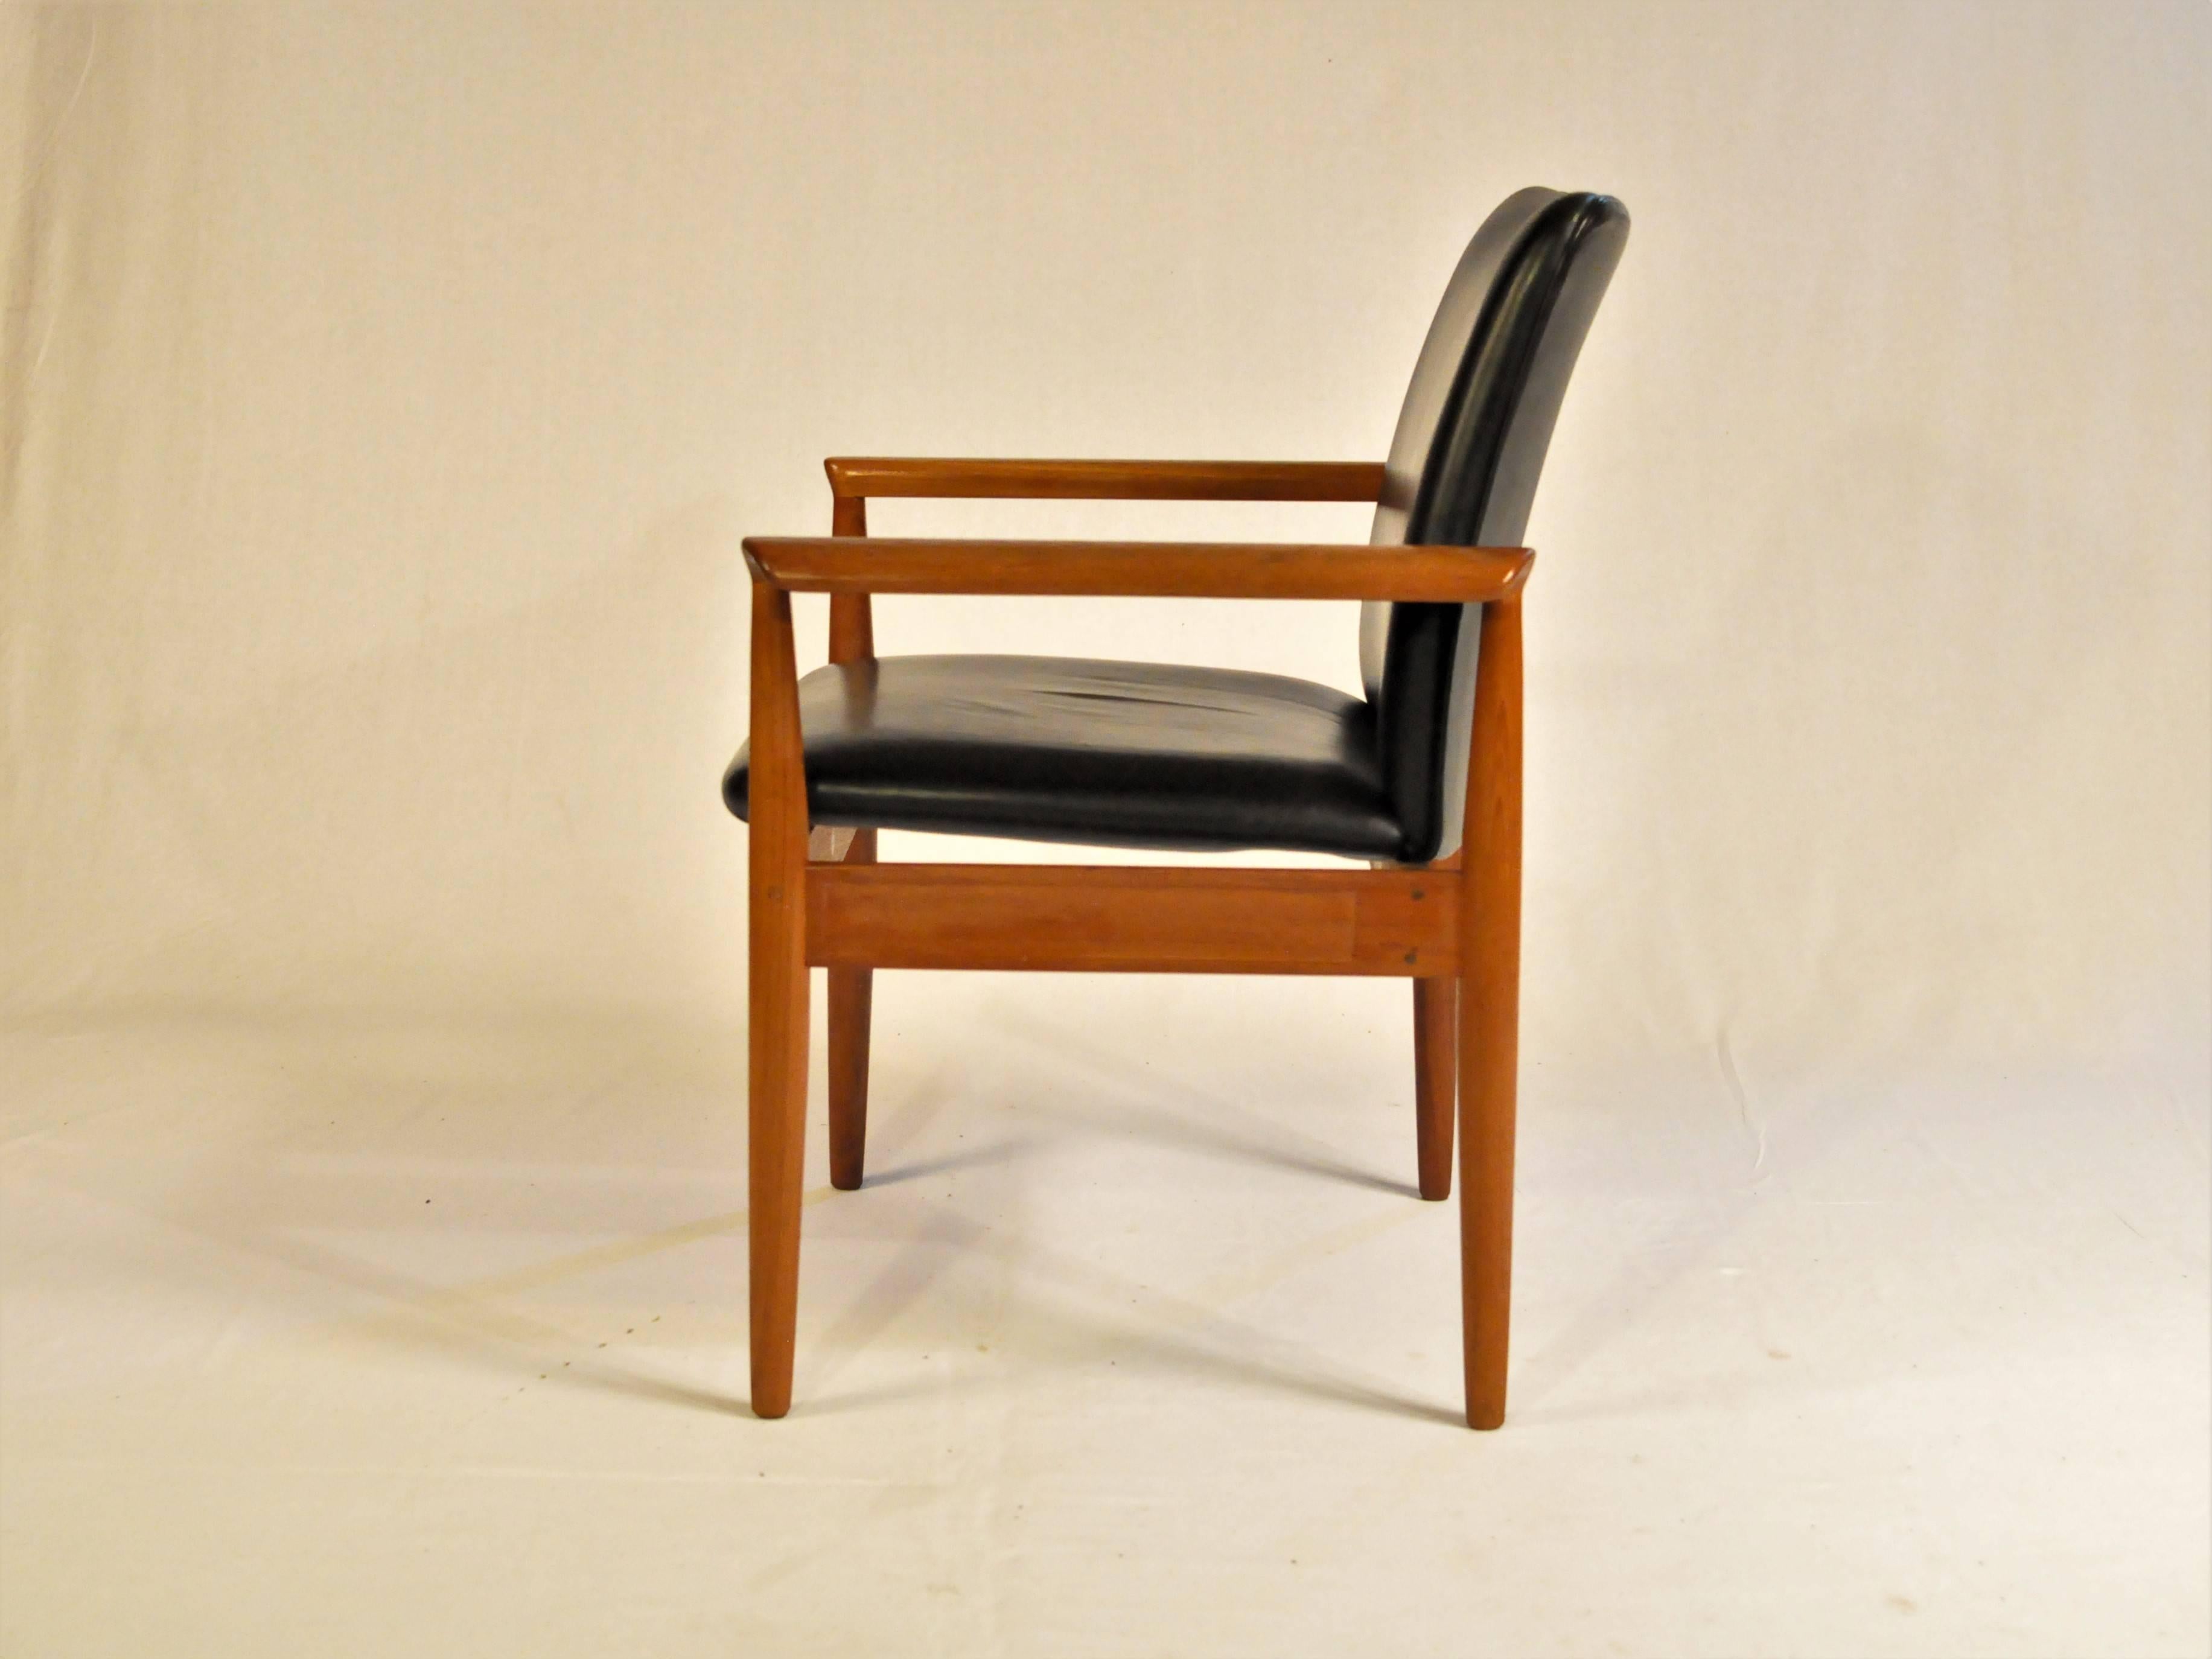 Set of six Finn Juhl armchairs in Bangkok teak and black leather designed in 1963 and made by France and Son / Cado in the 1960s

The armchairs have a solid stabile frame in teak and seats in black leather with deep foam that make them very